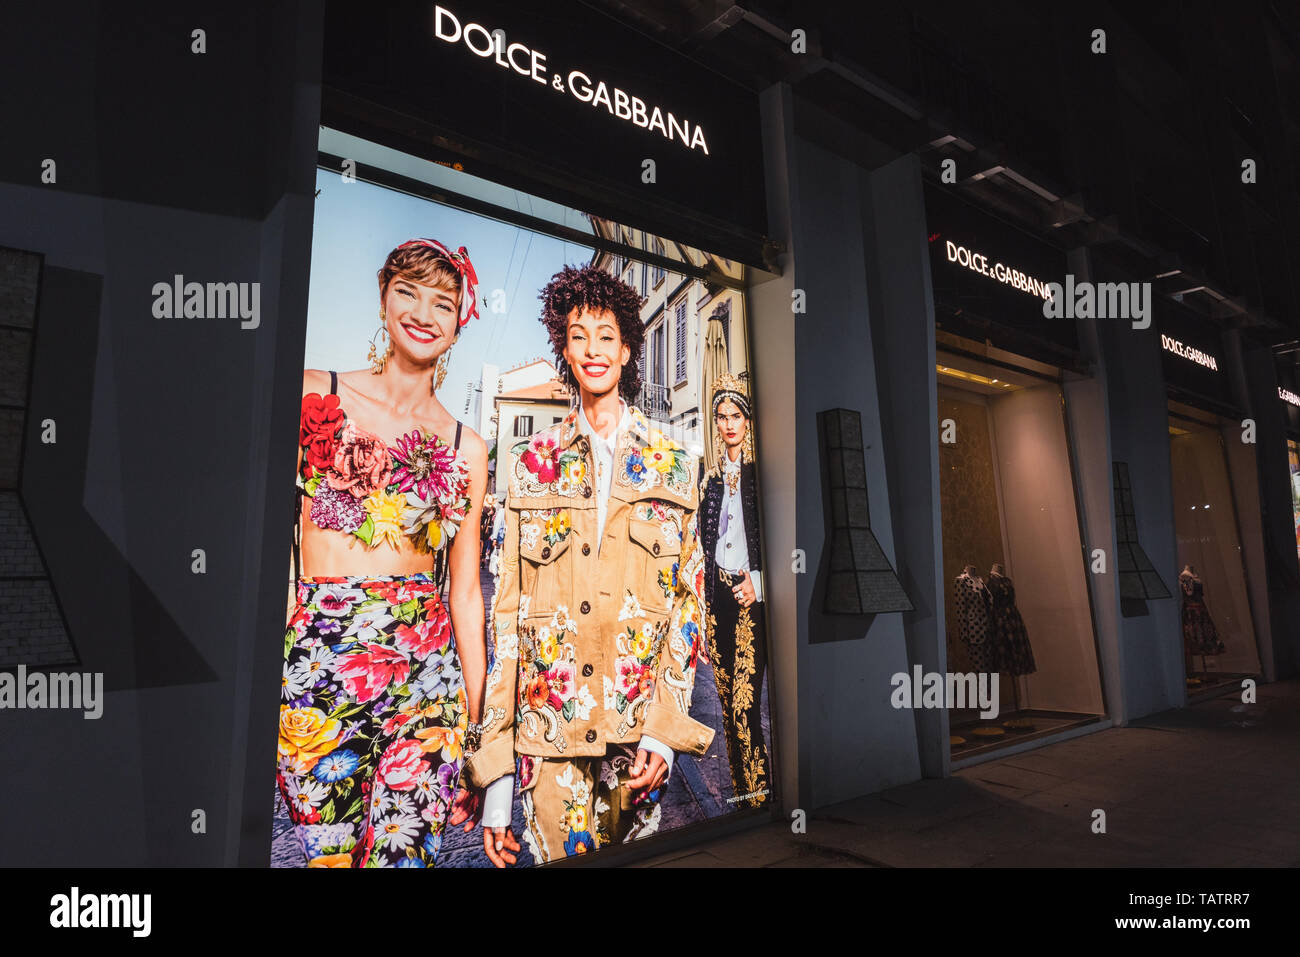 Ho Chi Minh City, Vietnam - April 23, 2019: Dolce & Gabbana shop's exterior at night, front windows with clothes and a poster showing women models. Stock Photo